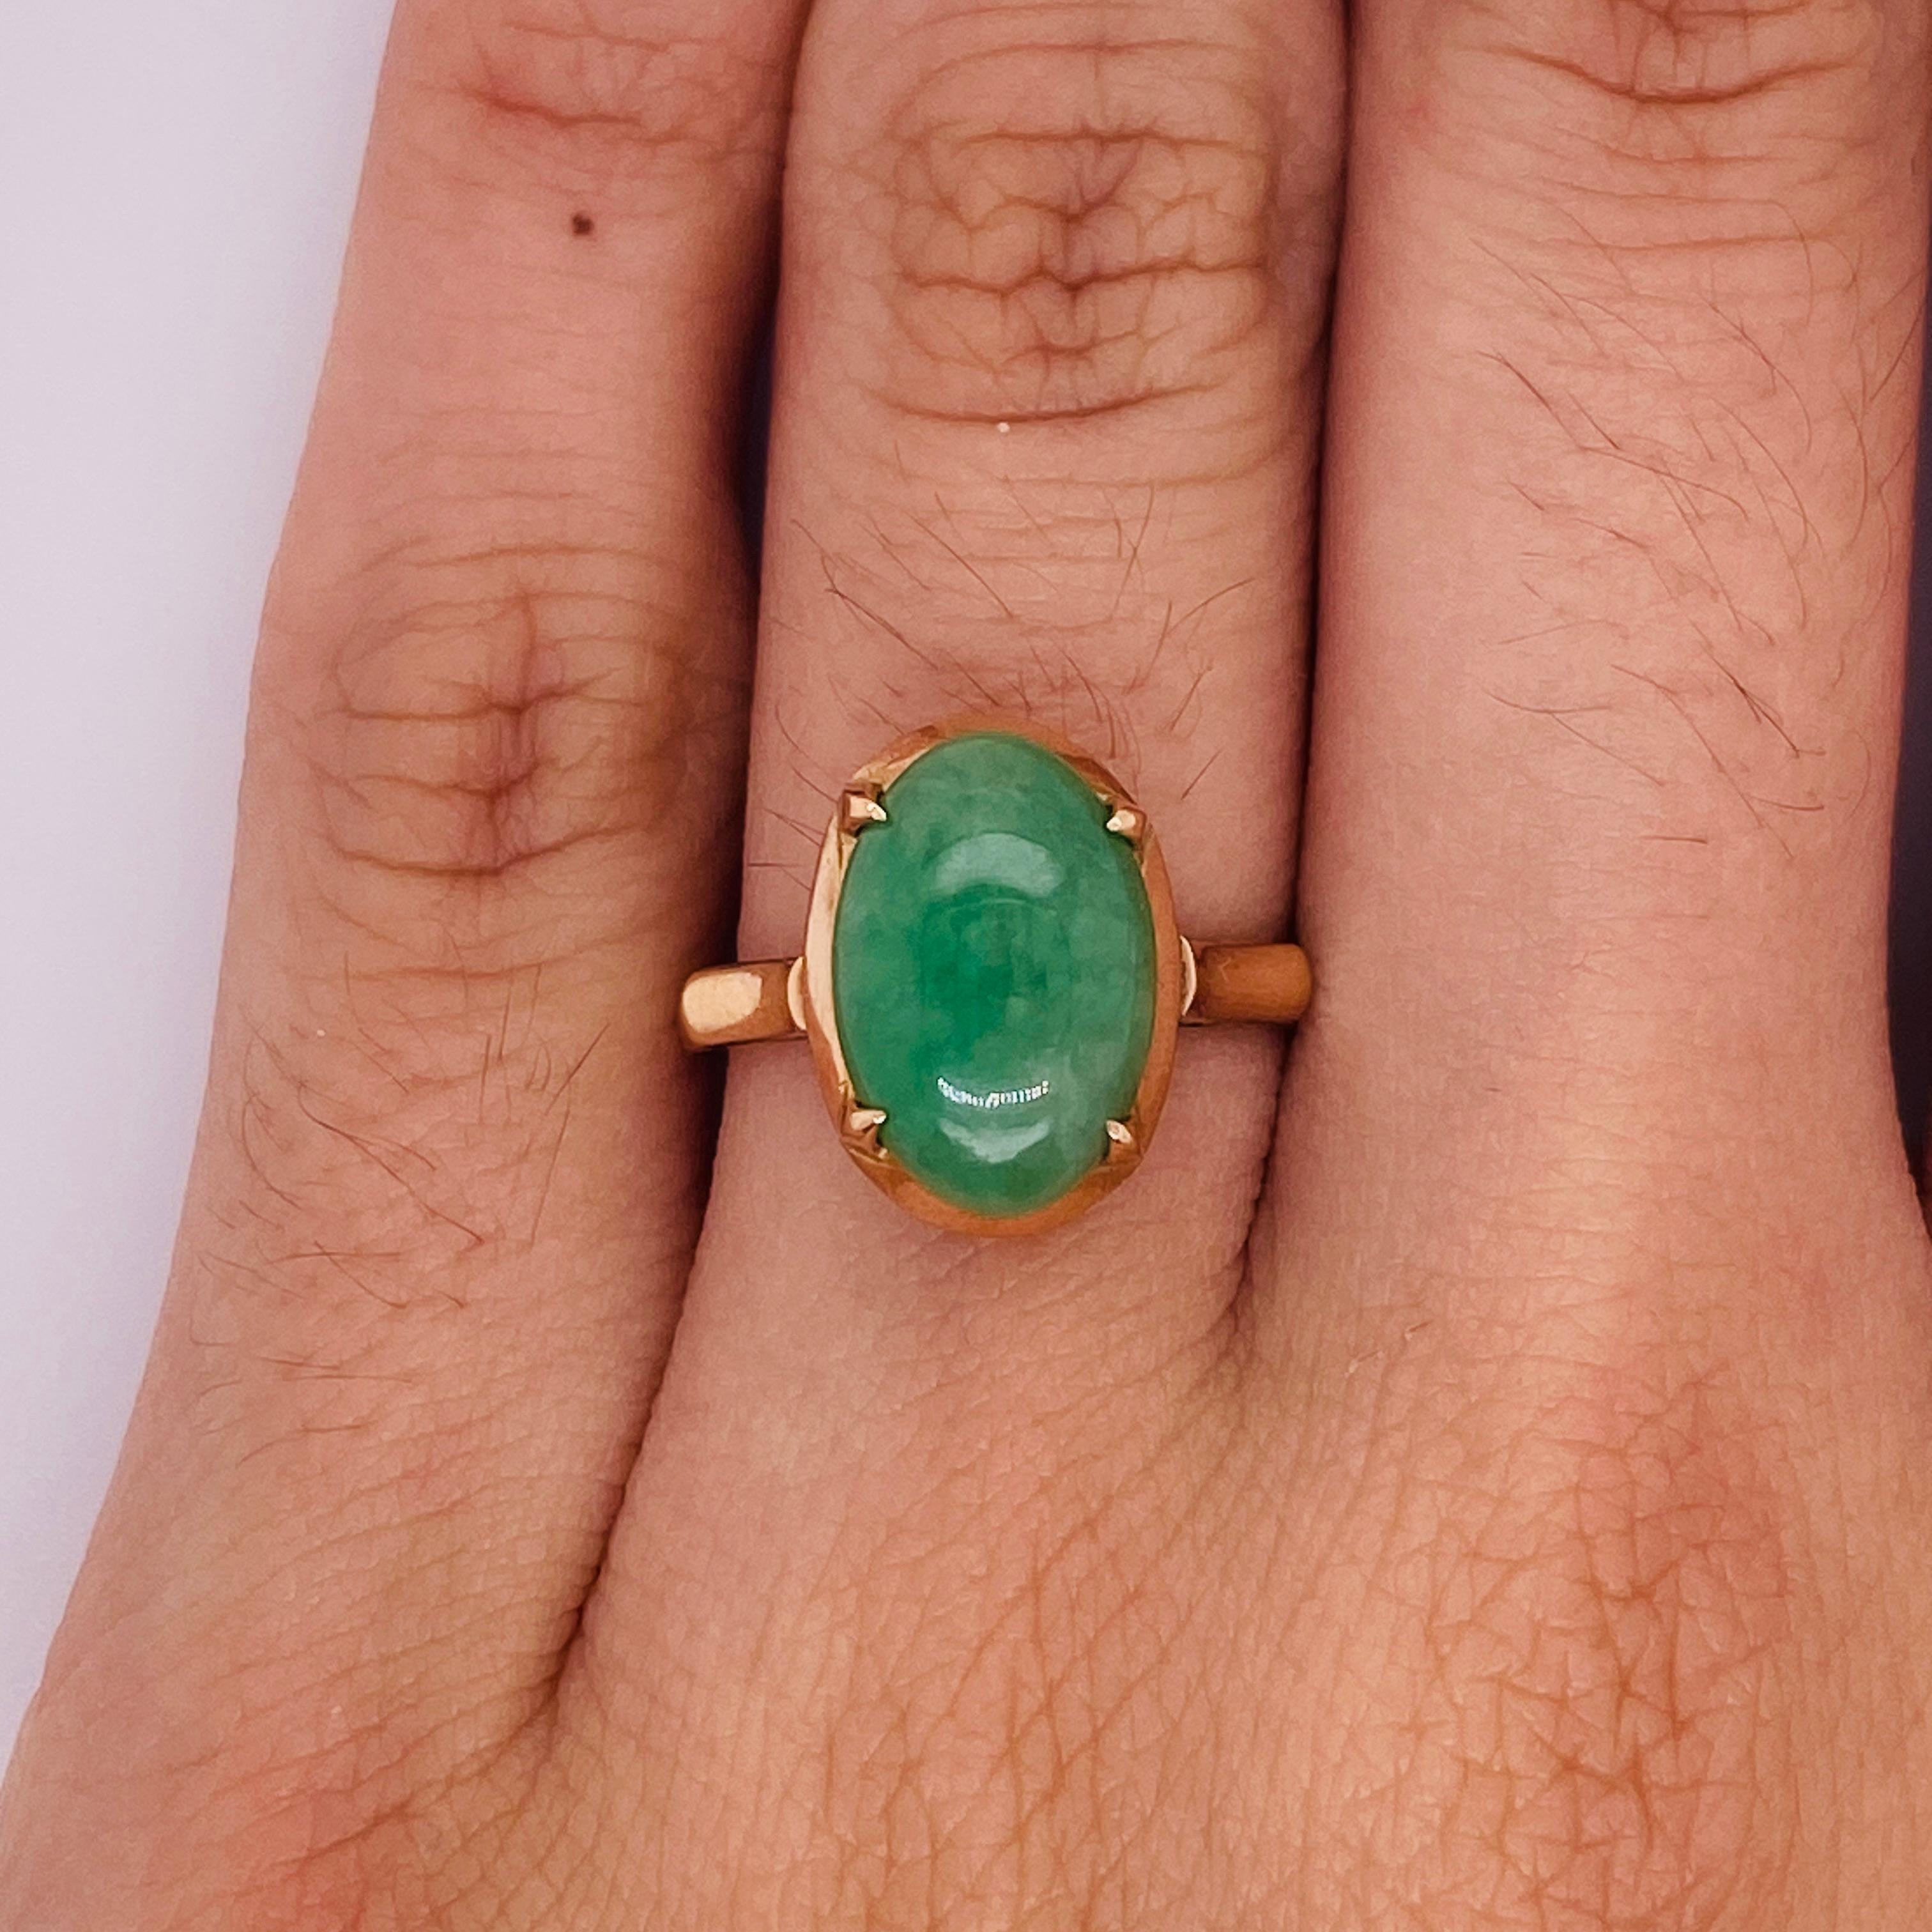 Jade is the perfect stone for everyday wear. Wear it year round and let the green color compliment any color you wear! Green gems are like the stem of a flower that supports and compliments their bright flowers! The jade has a little shift in greens